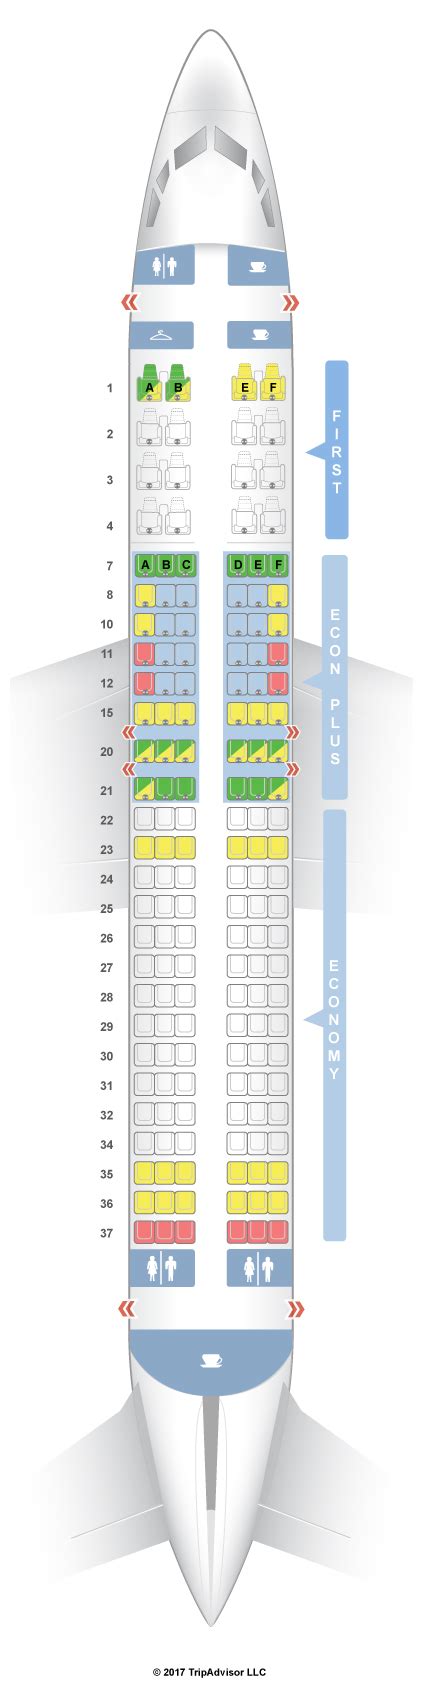 boeing 737 800 seat map united